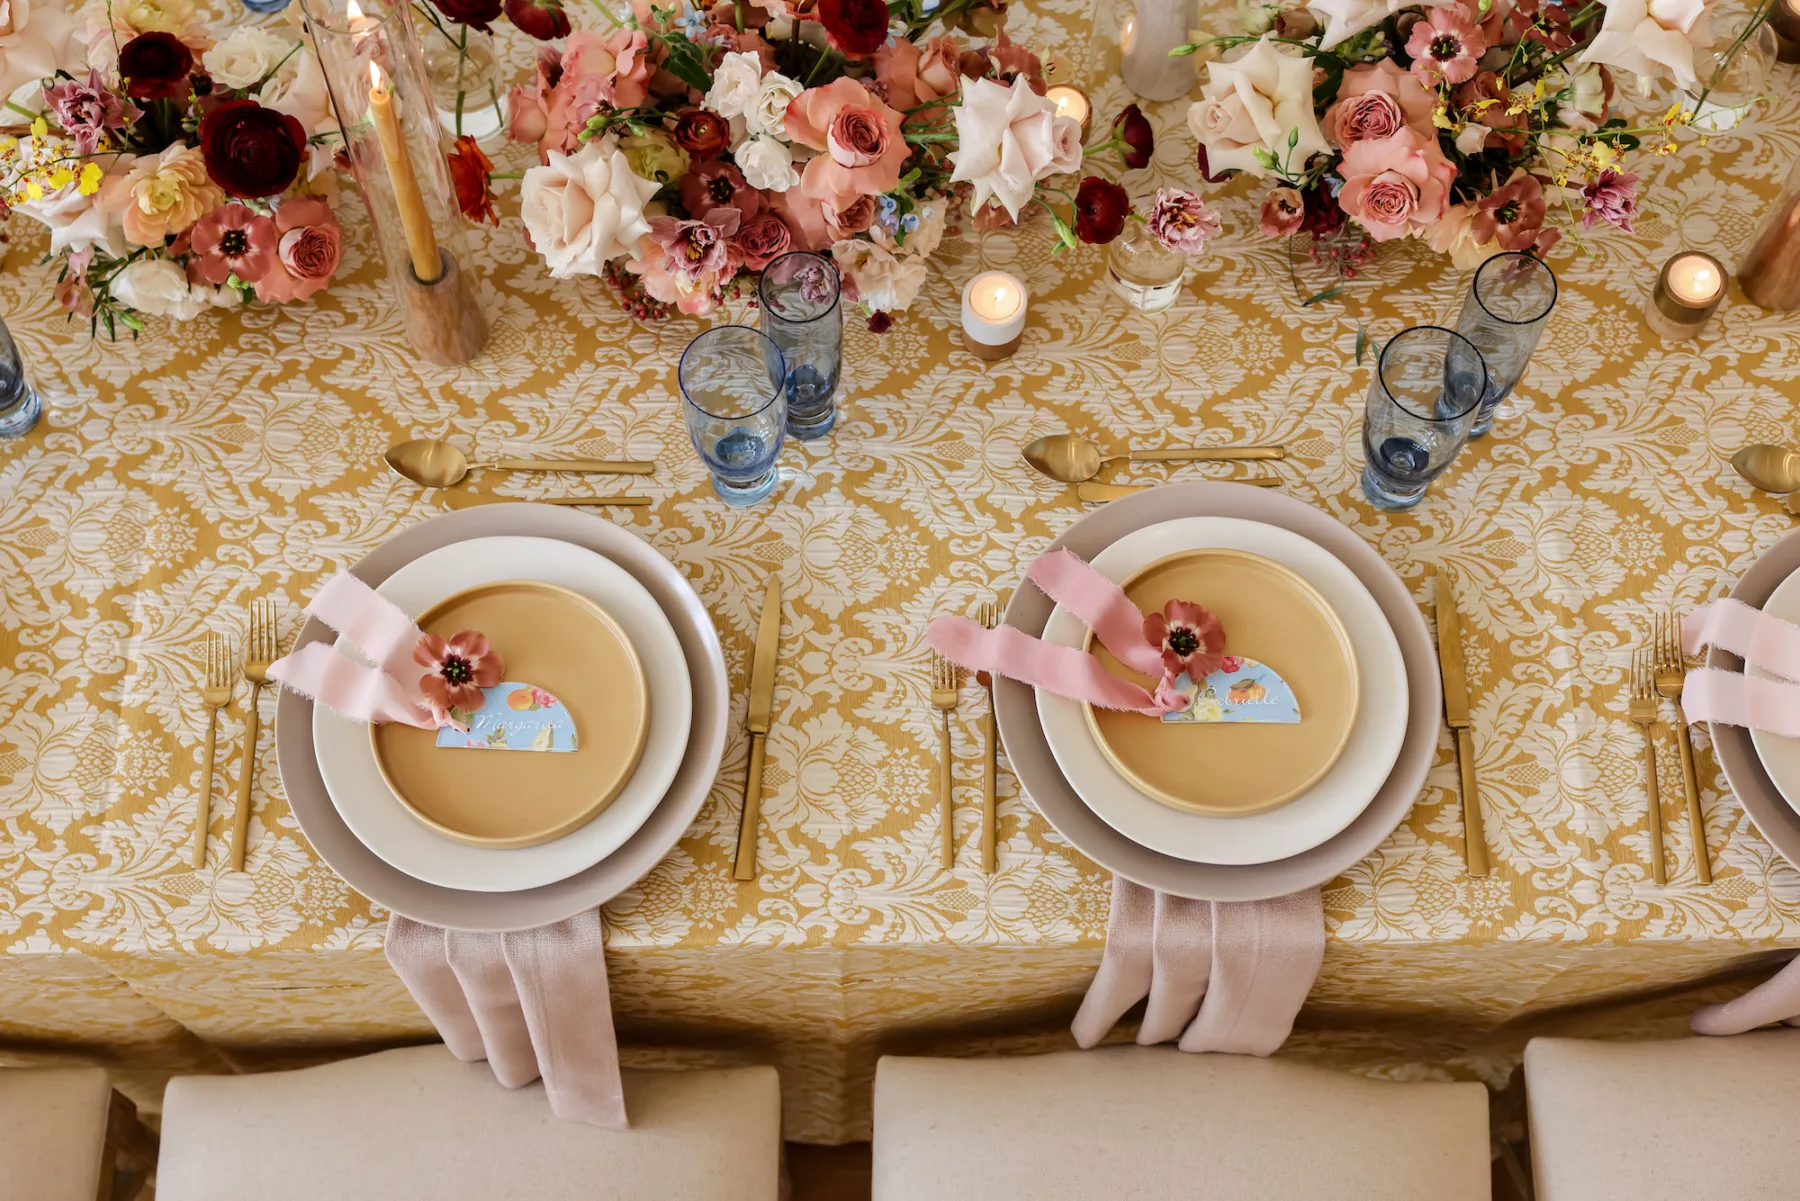 Retro Mid-Century Wedding Reception Yellow Place Setting Decor Inspiration | Pink, Red, and White Rose Centerpiece Ideas